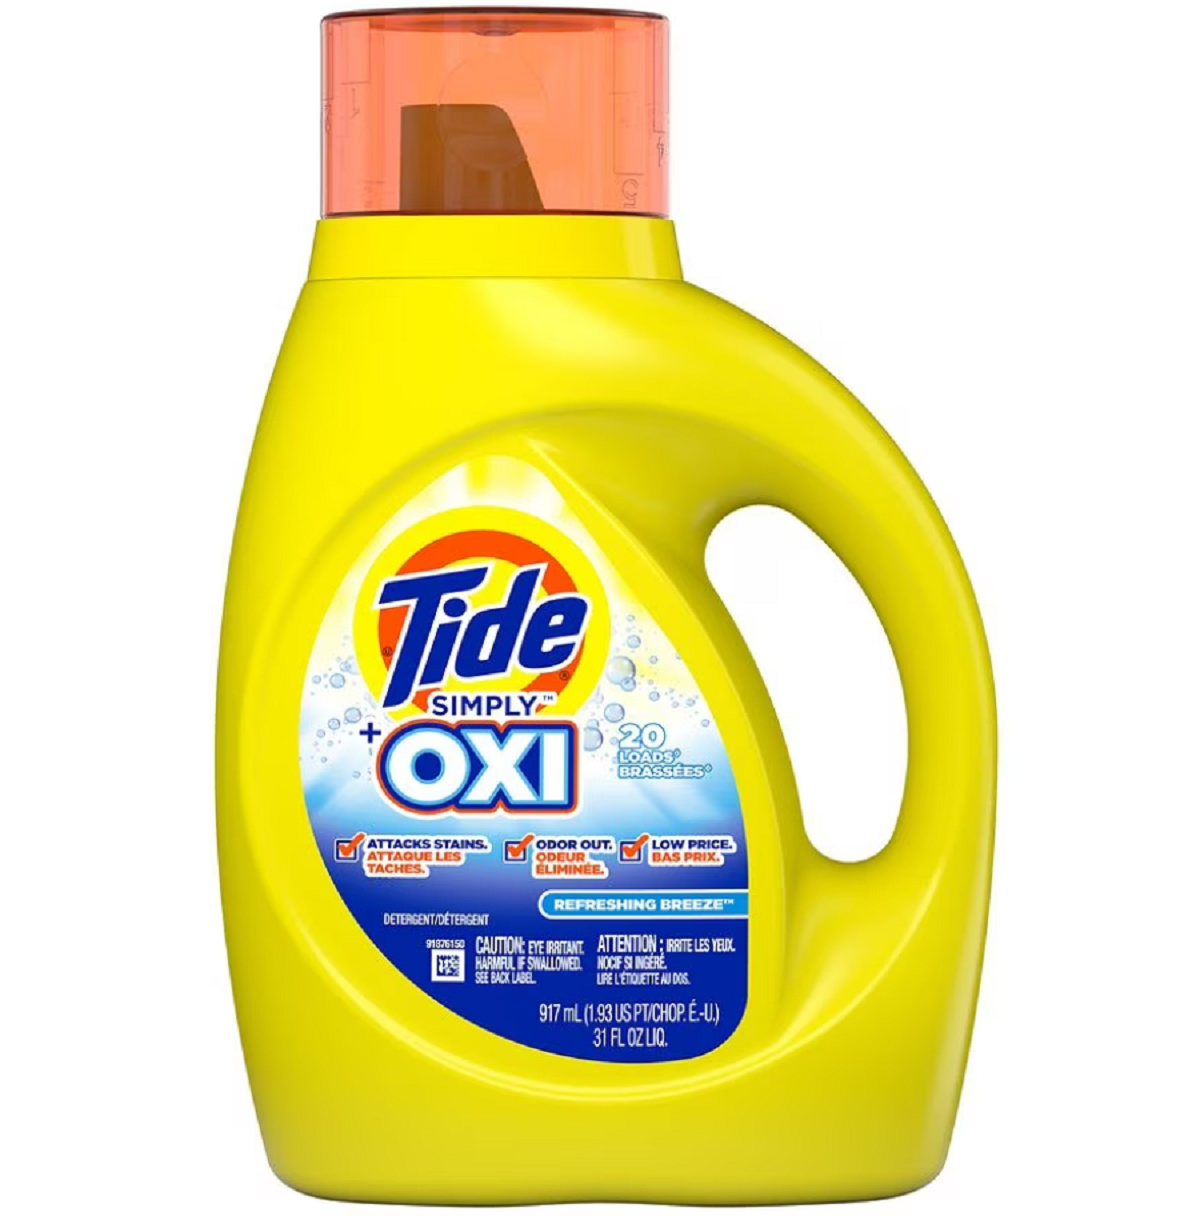 Tide Simply +Oxi Liquid Laundry Detergent, Refreshing Breeze, Tide Simply Laundry Detergent Printable Coupon